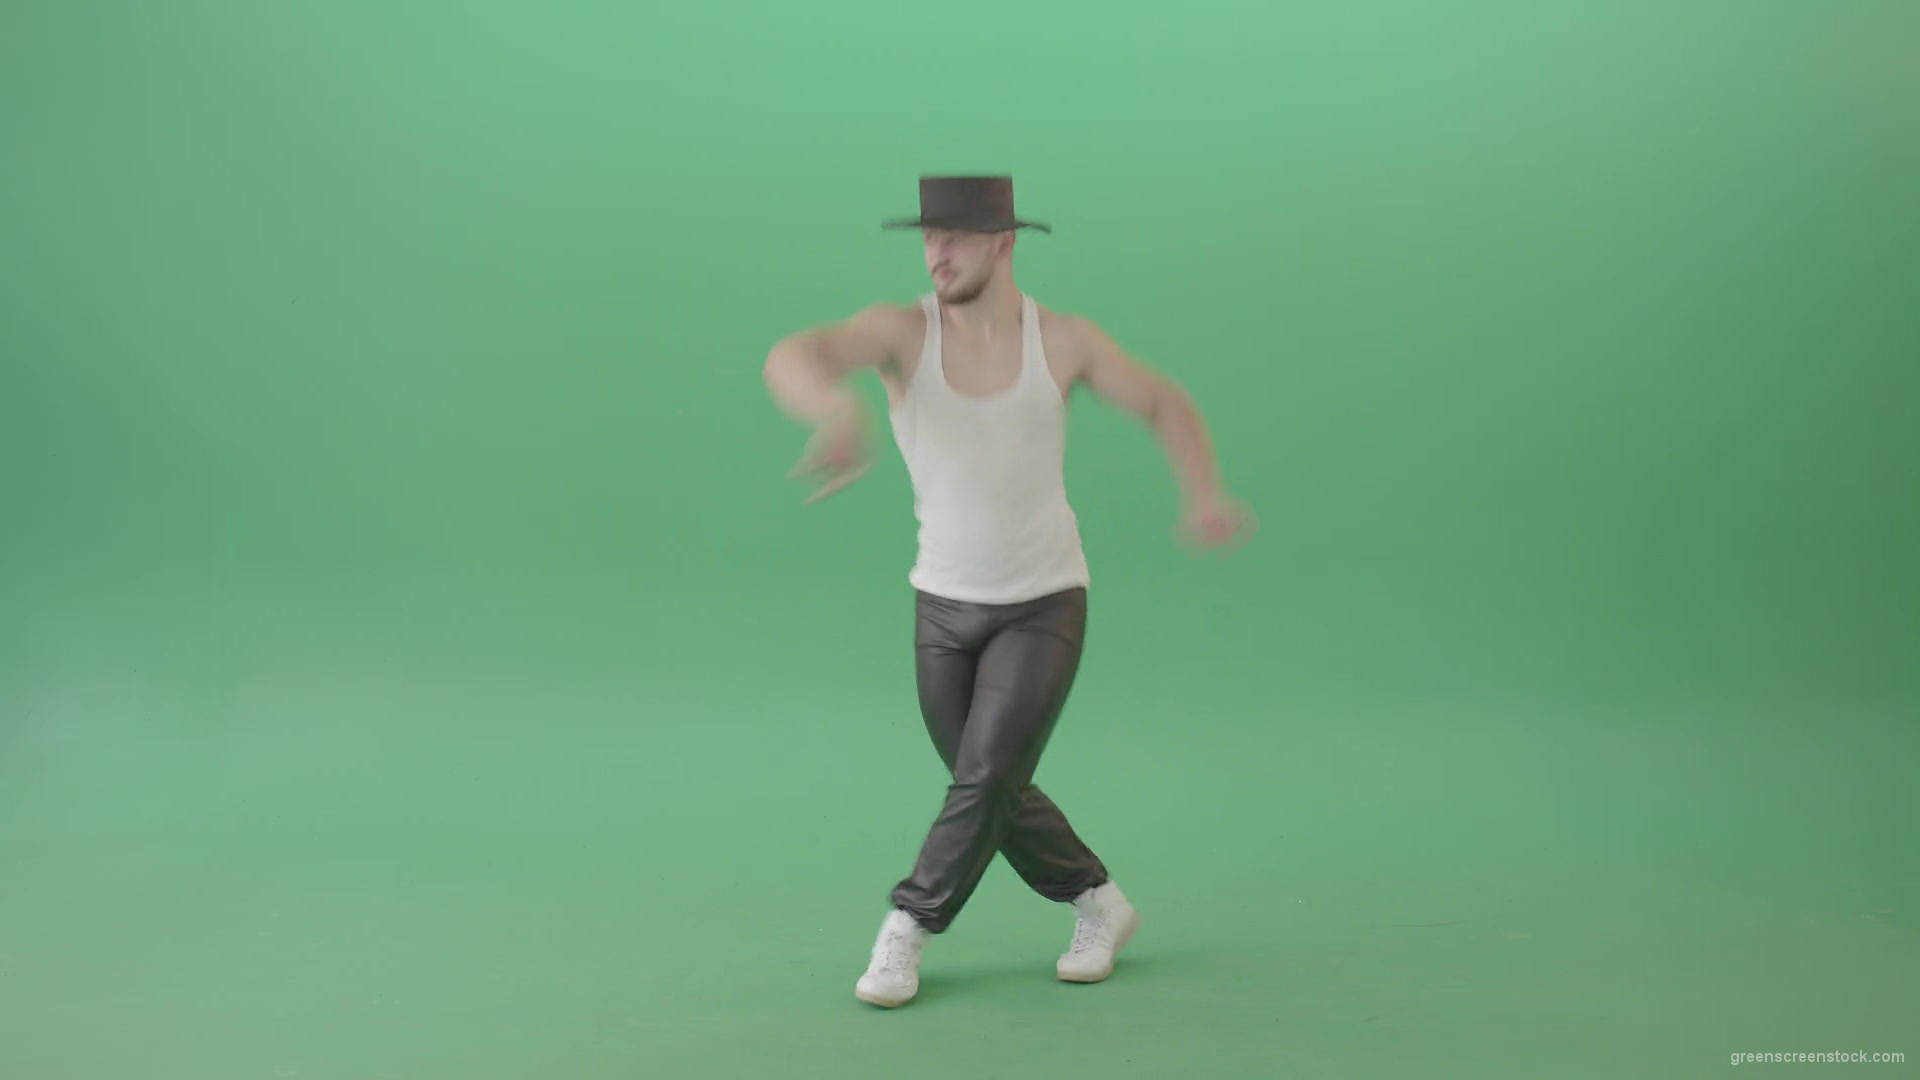 Adult-Man-makes-moonwalk-and-dancing-Pop-isolated-on-Green-Screen-4K-Video-Footage-1920_008 Green Screen Stock